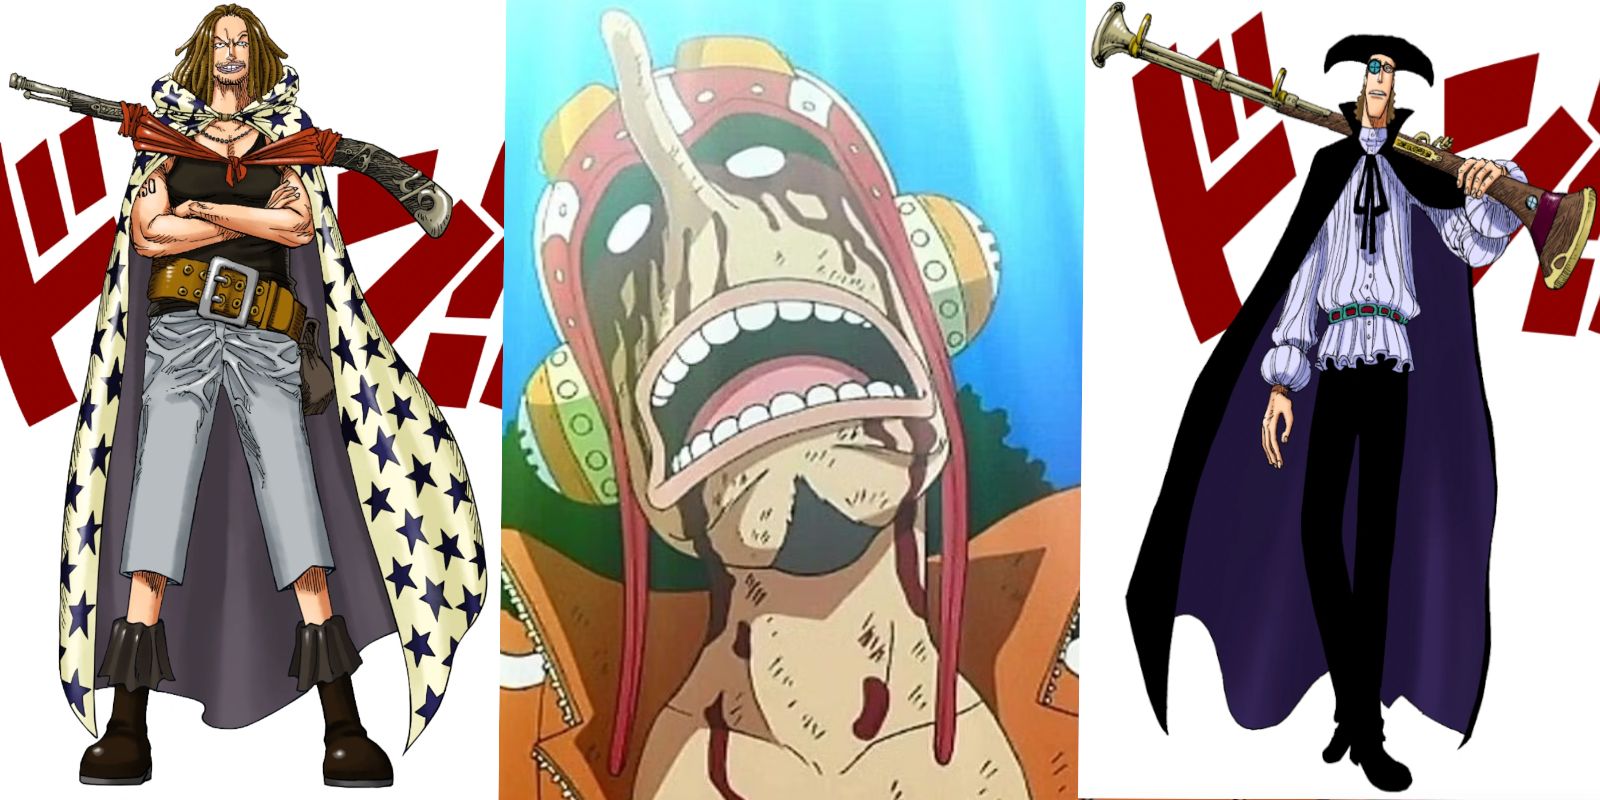 One Piece characters Yasopp, Usopp, and Van Auger are put side by side to each other with Usopp bloody from his battle in Dressrosa.